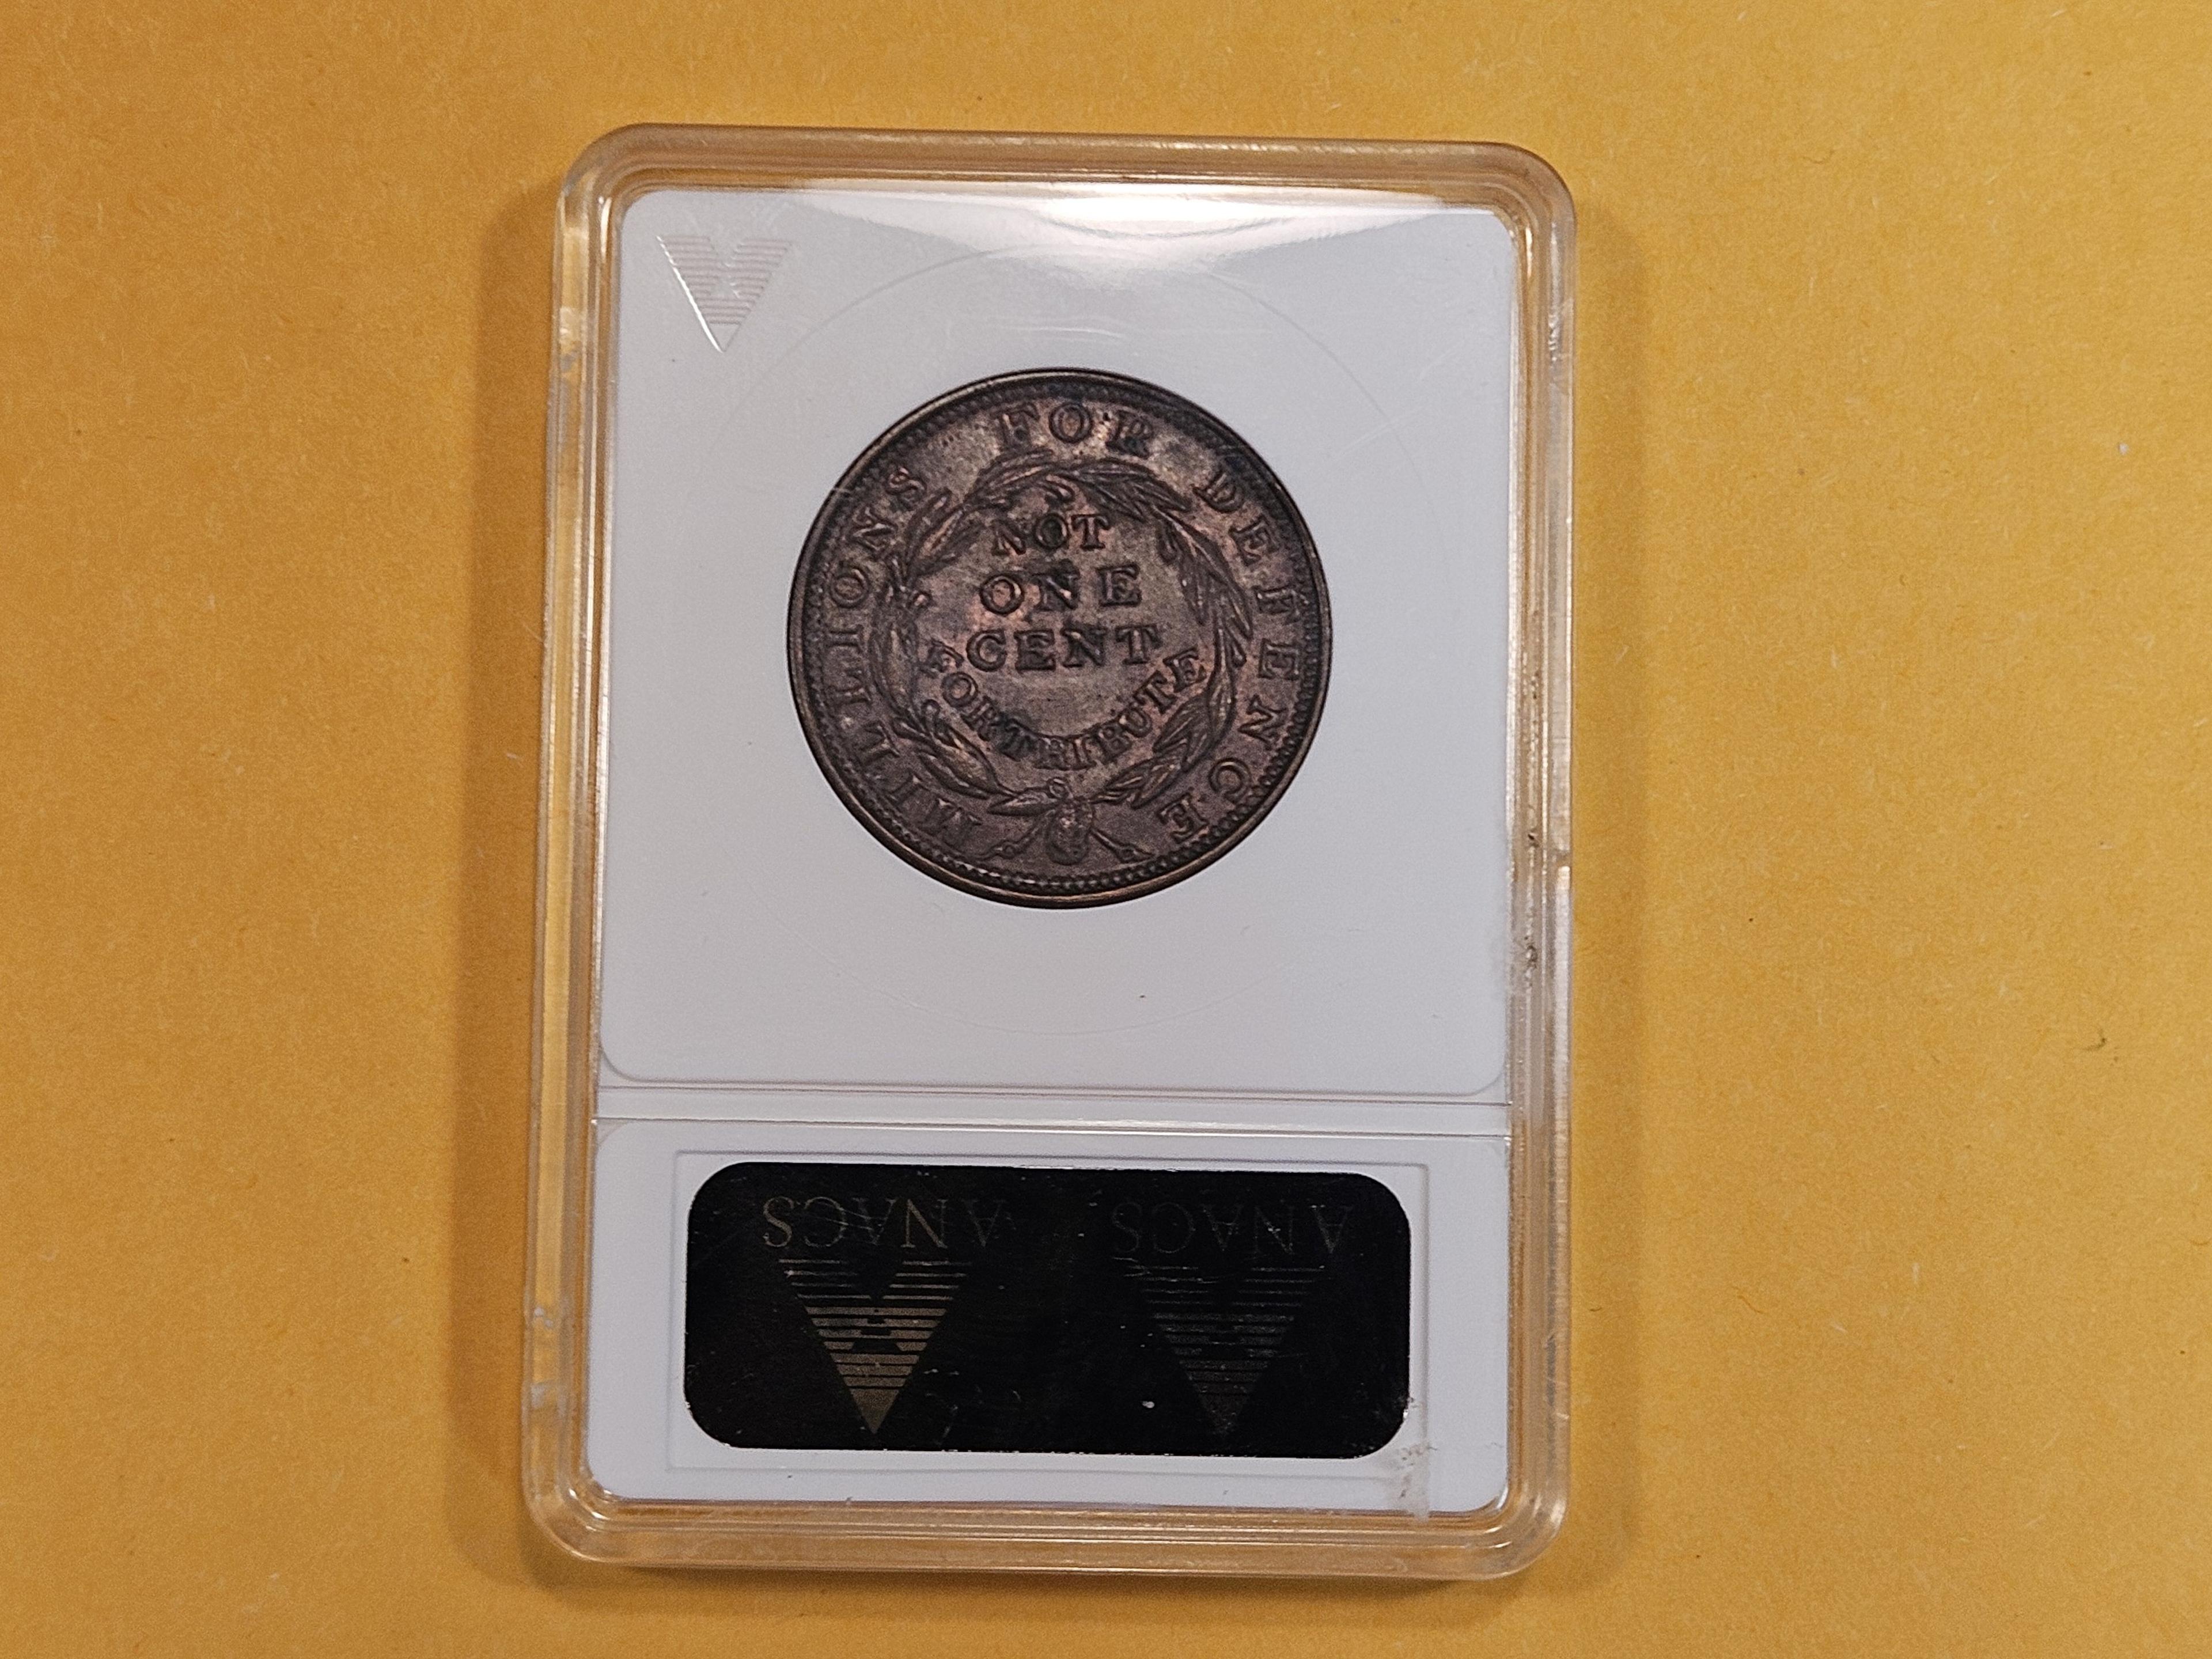 * ANACS 1837 Hard Times Token in Mint State 62 Brown